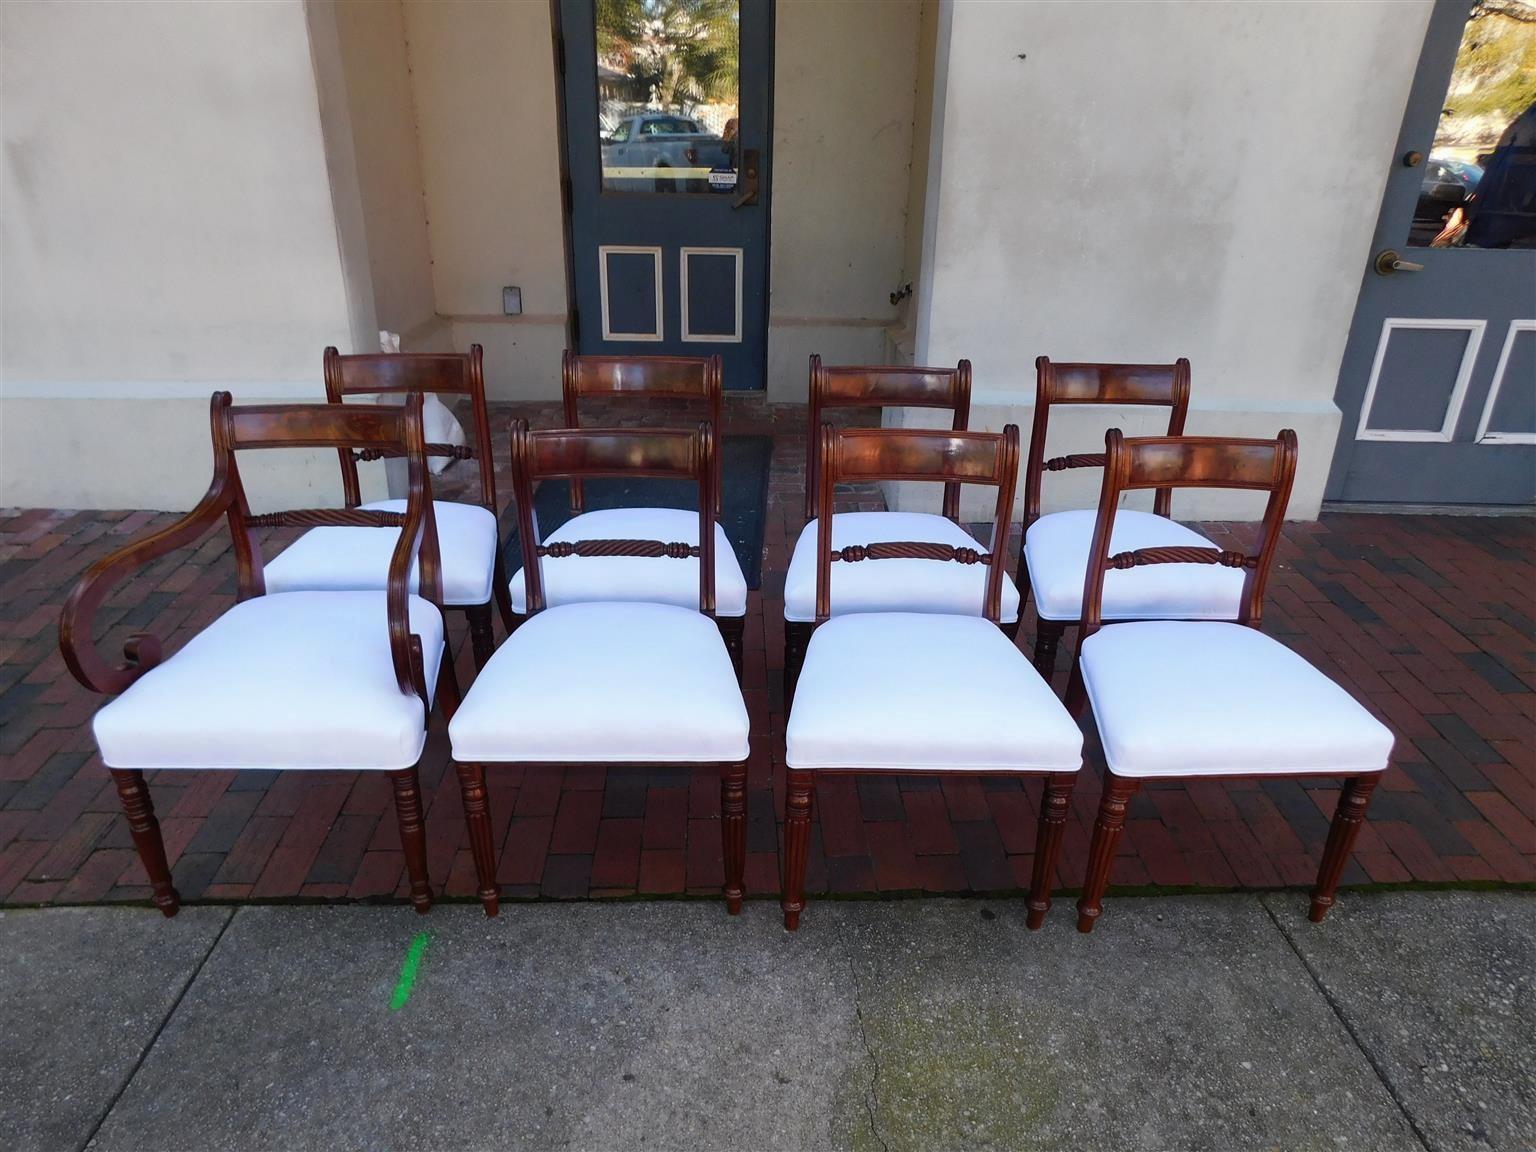 English Regency set of eight mahogany dining room chairs with scrolled crest rails and arms, rectangular splat backs, barley twist spindles, white muslin seats, and resting on the original bulbous ringed reeded legs with splayed rear legs, early